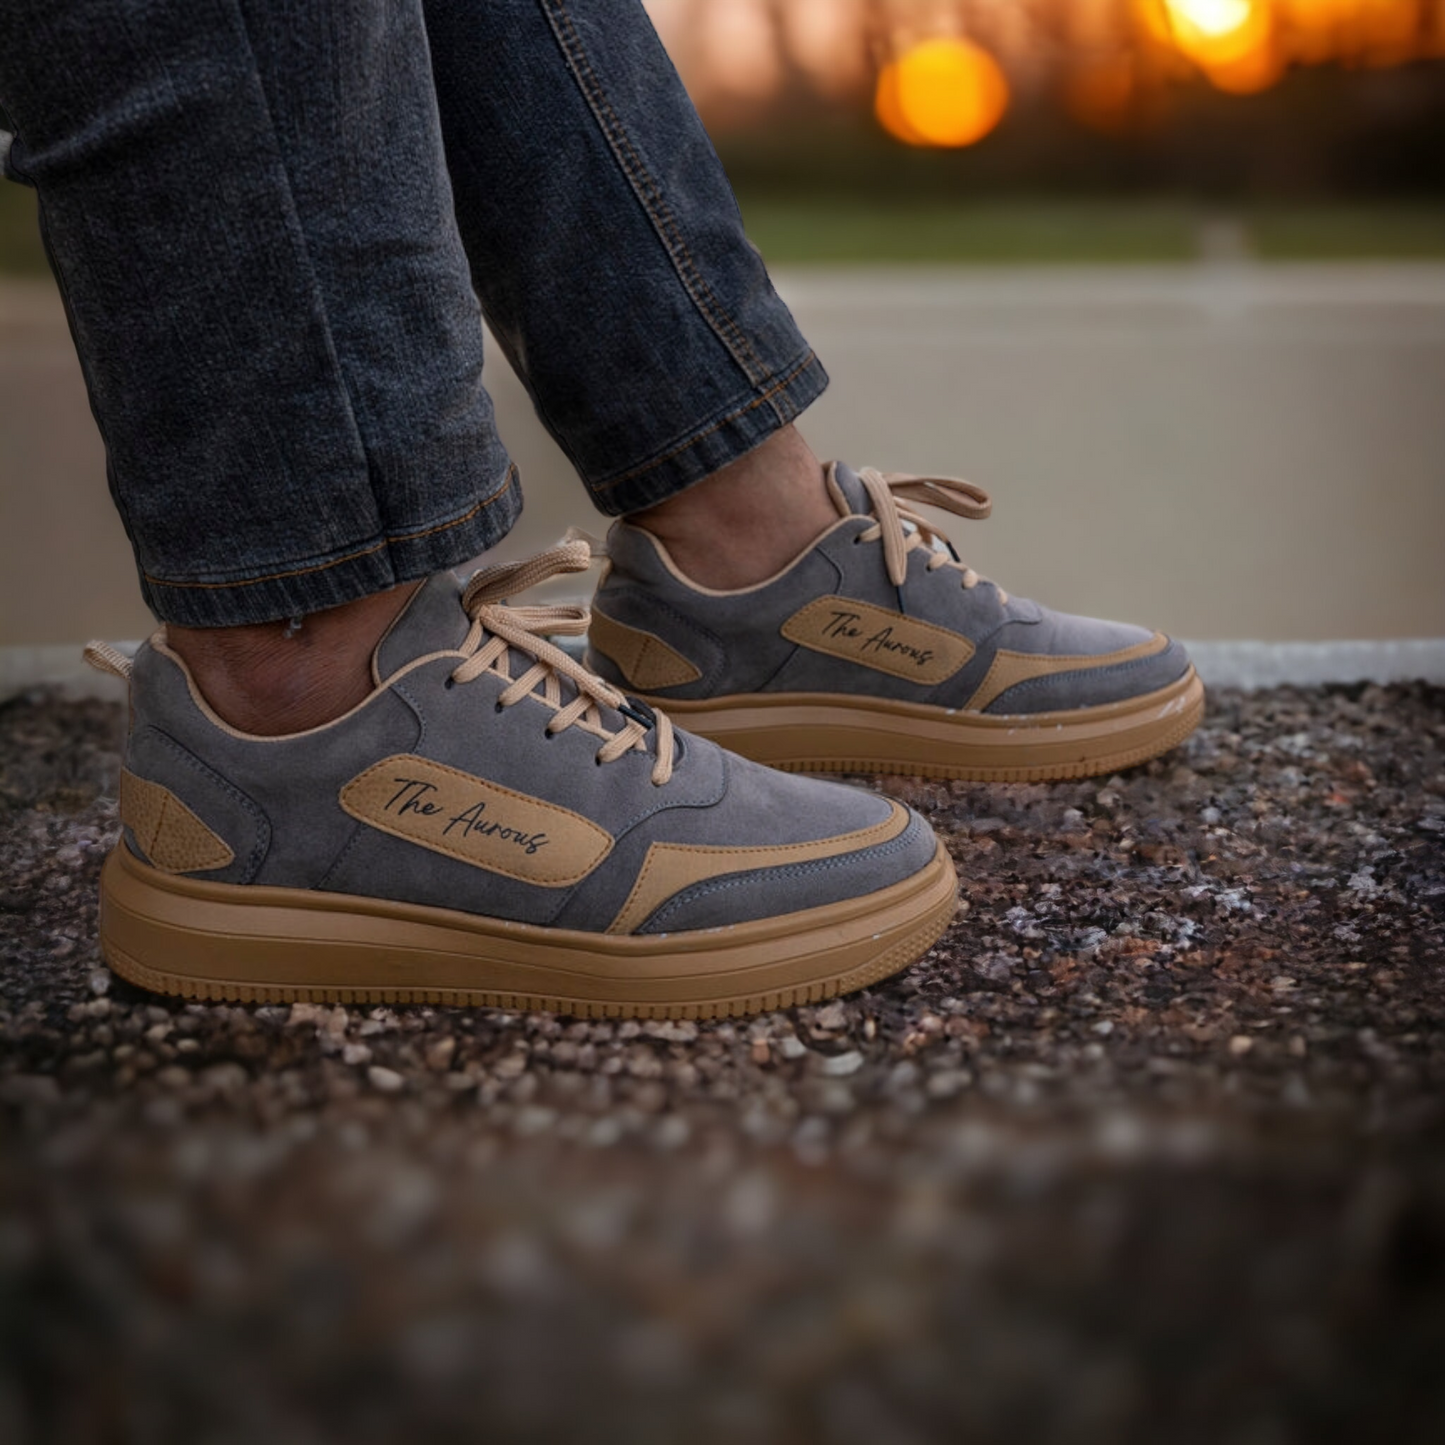 The Aurous Windstorm Smoky Laceup Sneakers